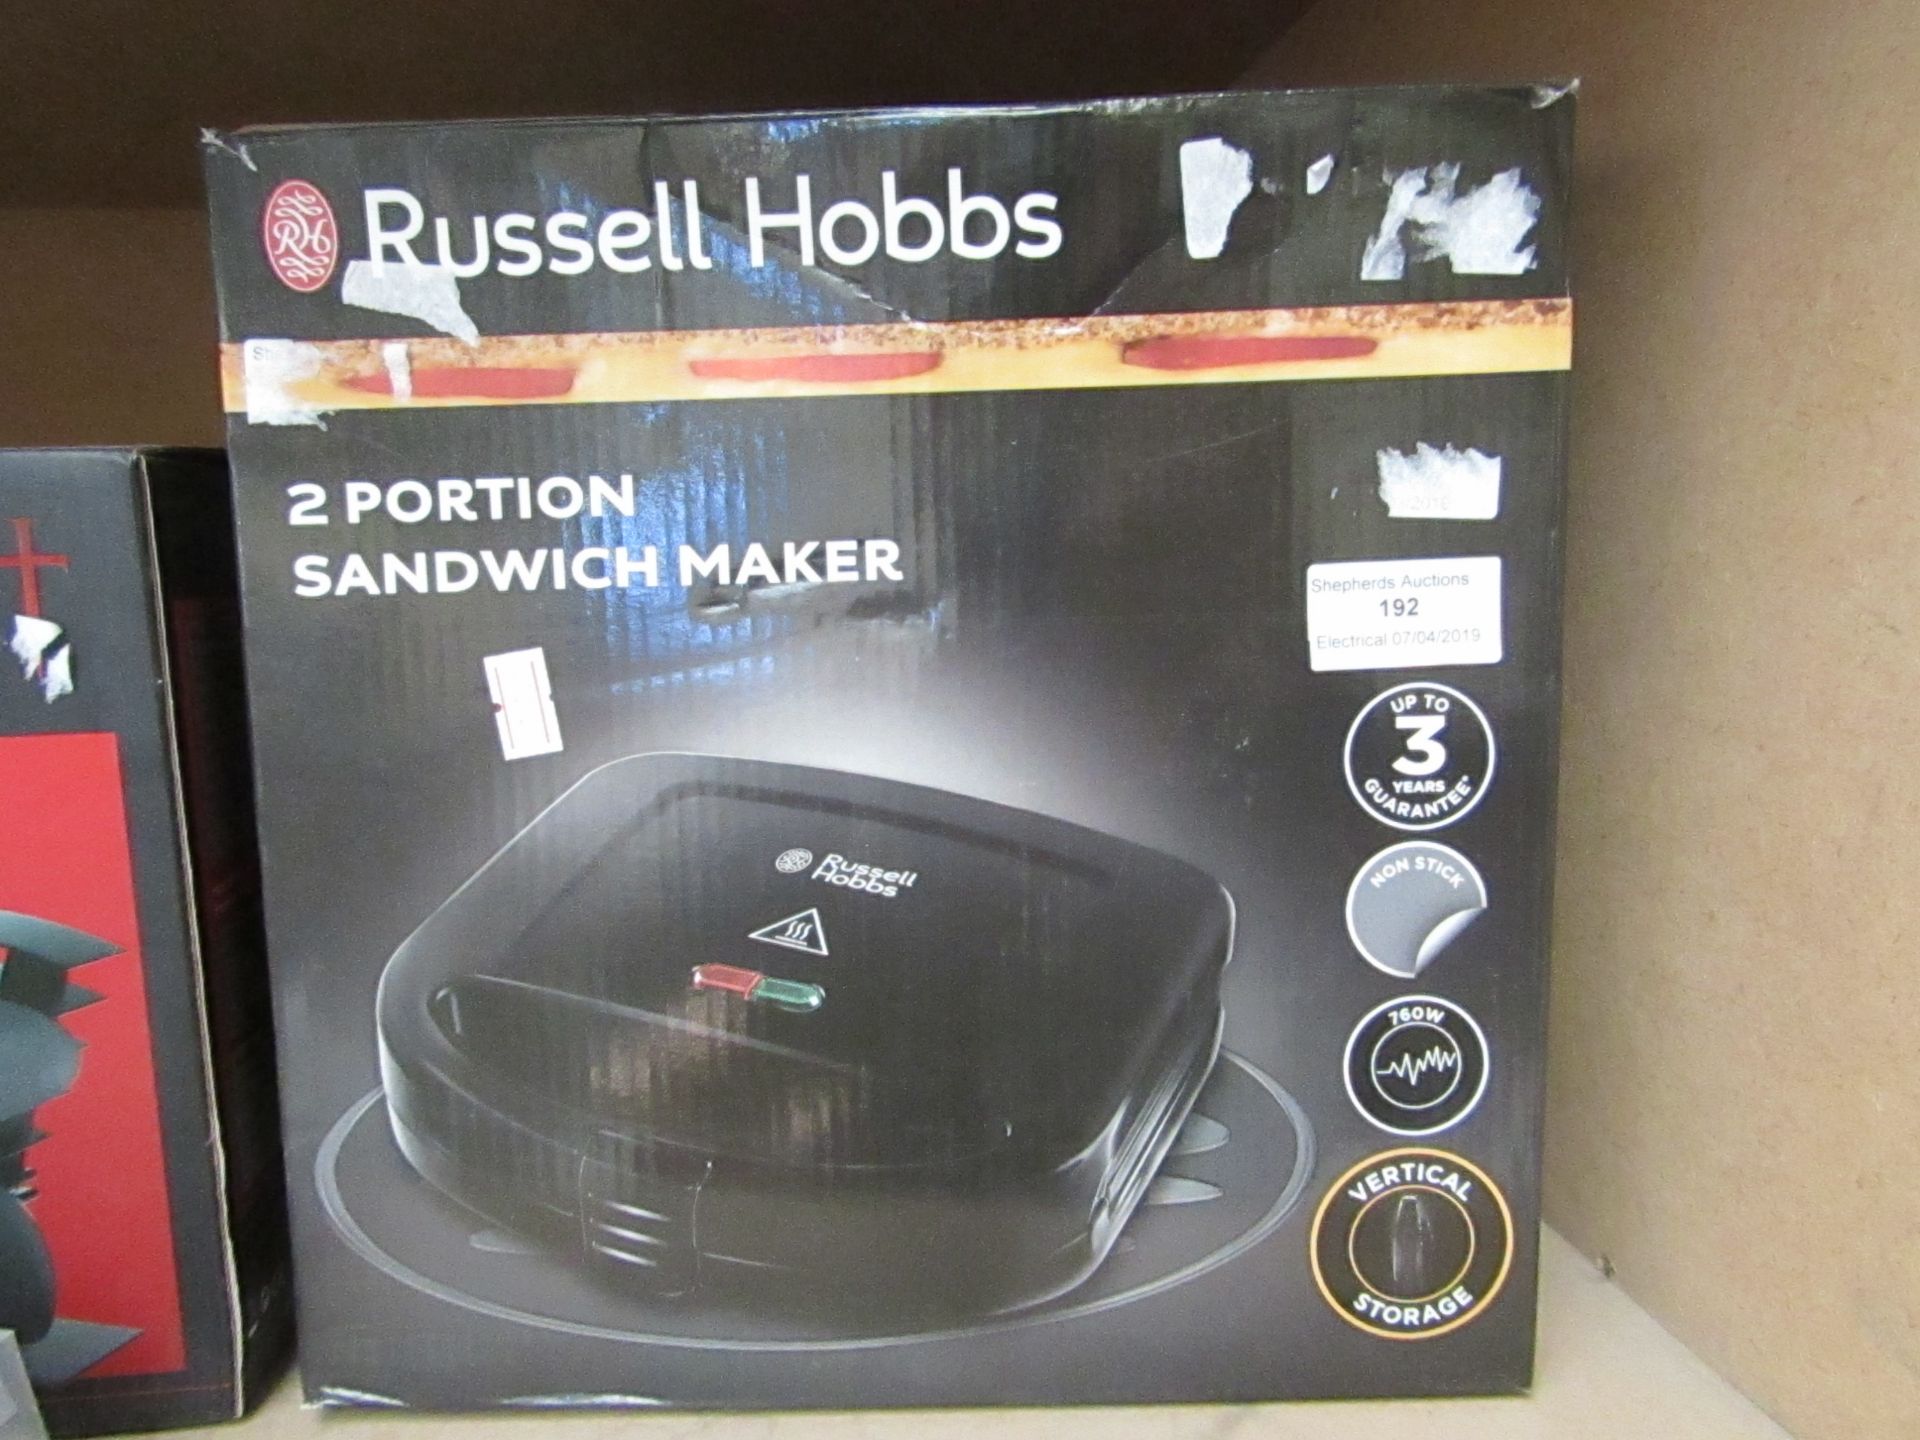 Russell Hobbs 2 portion sanwich maker, tested working and boxed.